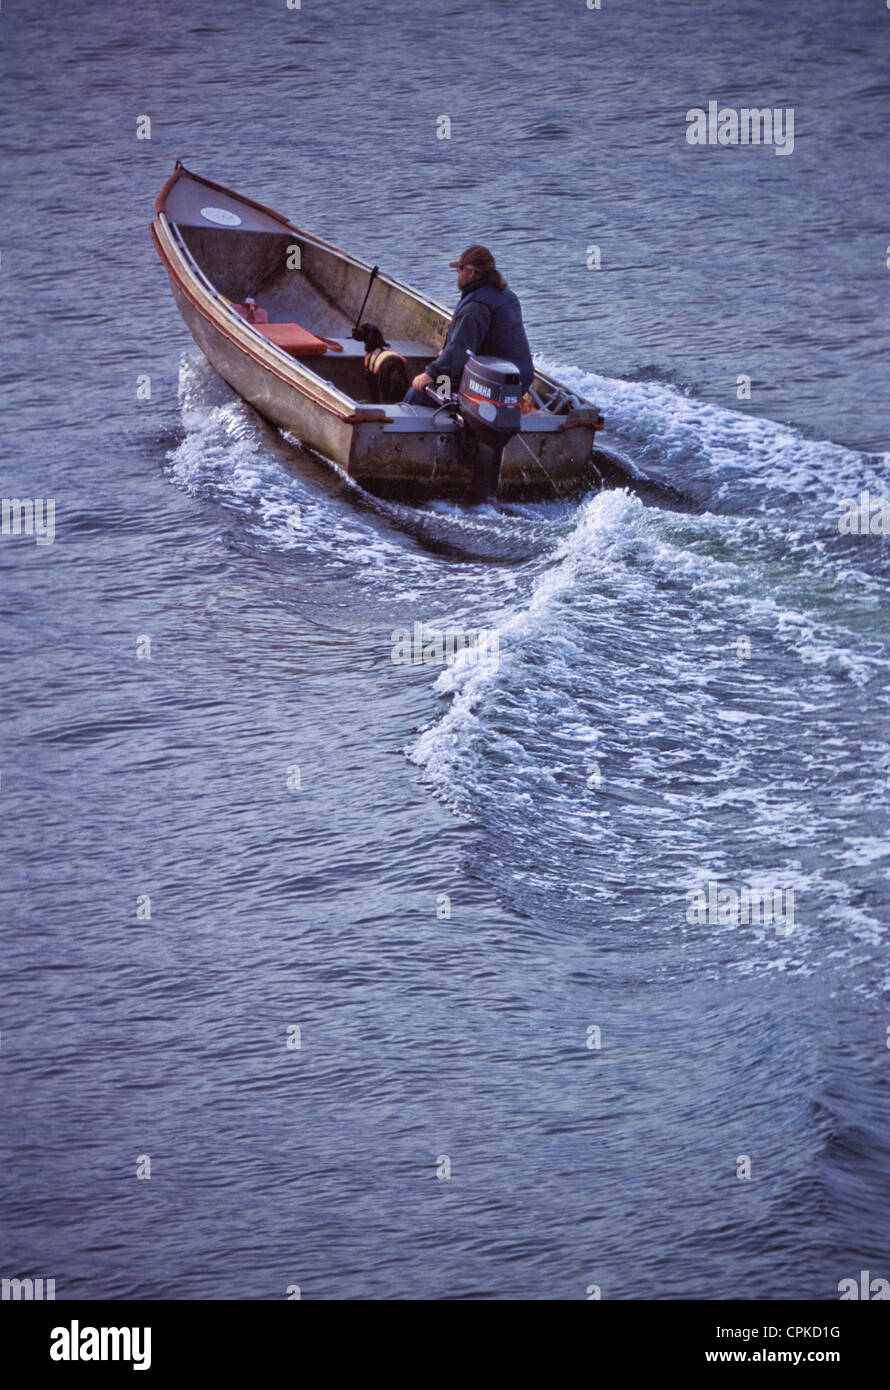 One man in outboard motor boat Stock Photo - Alamy